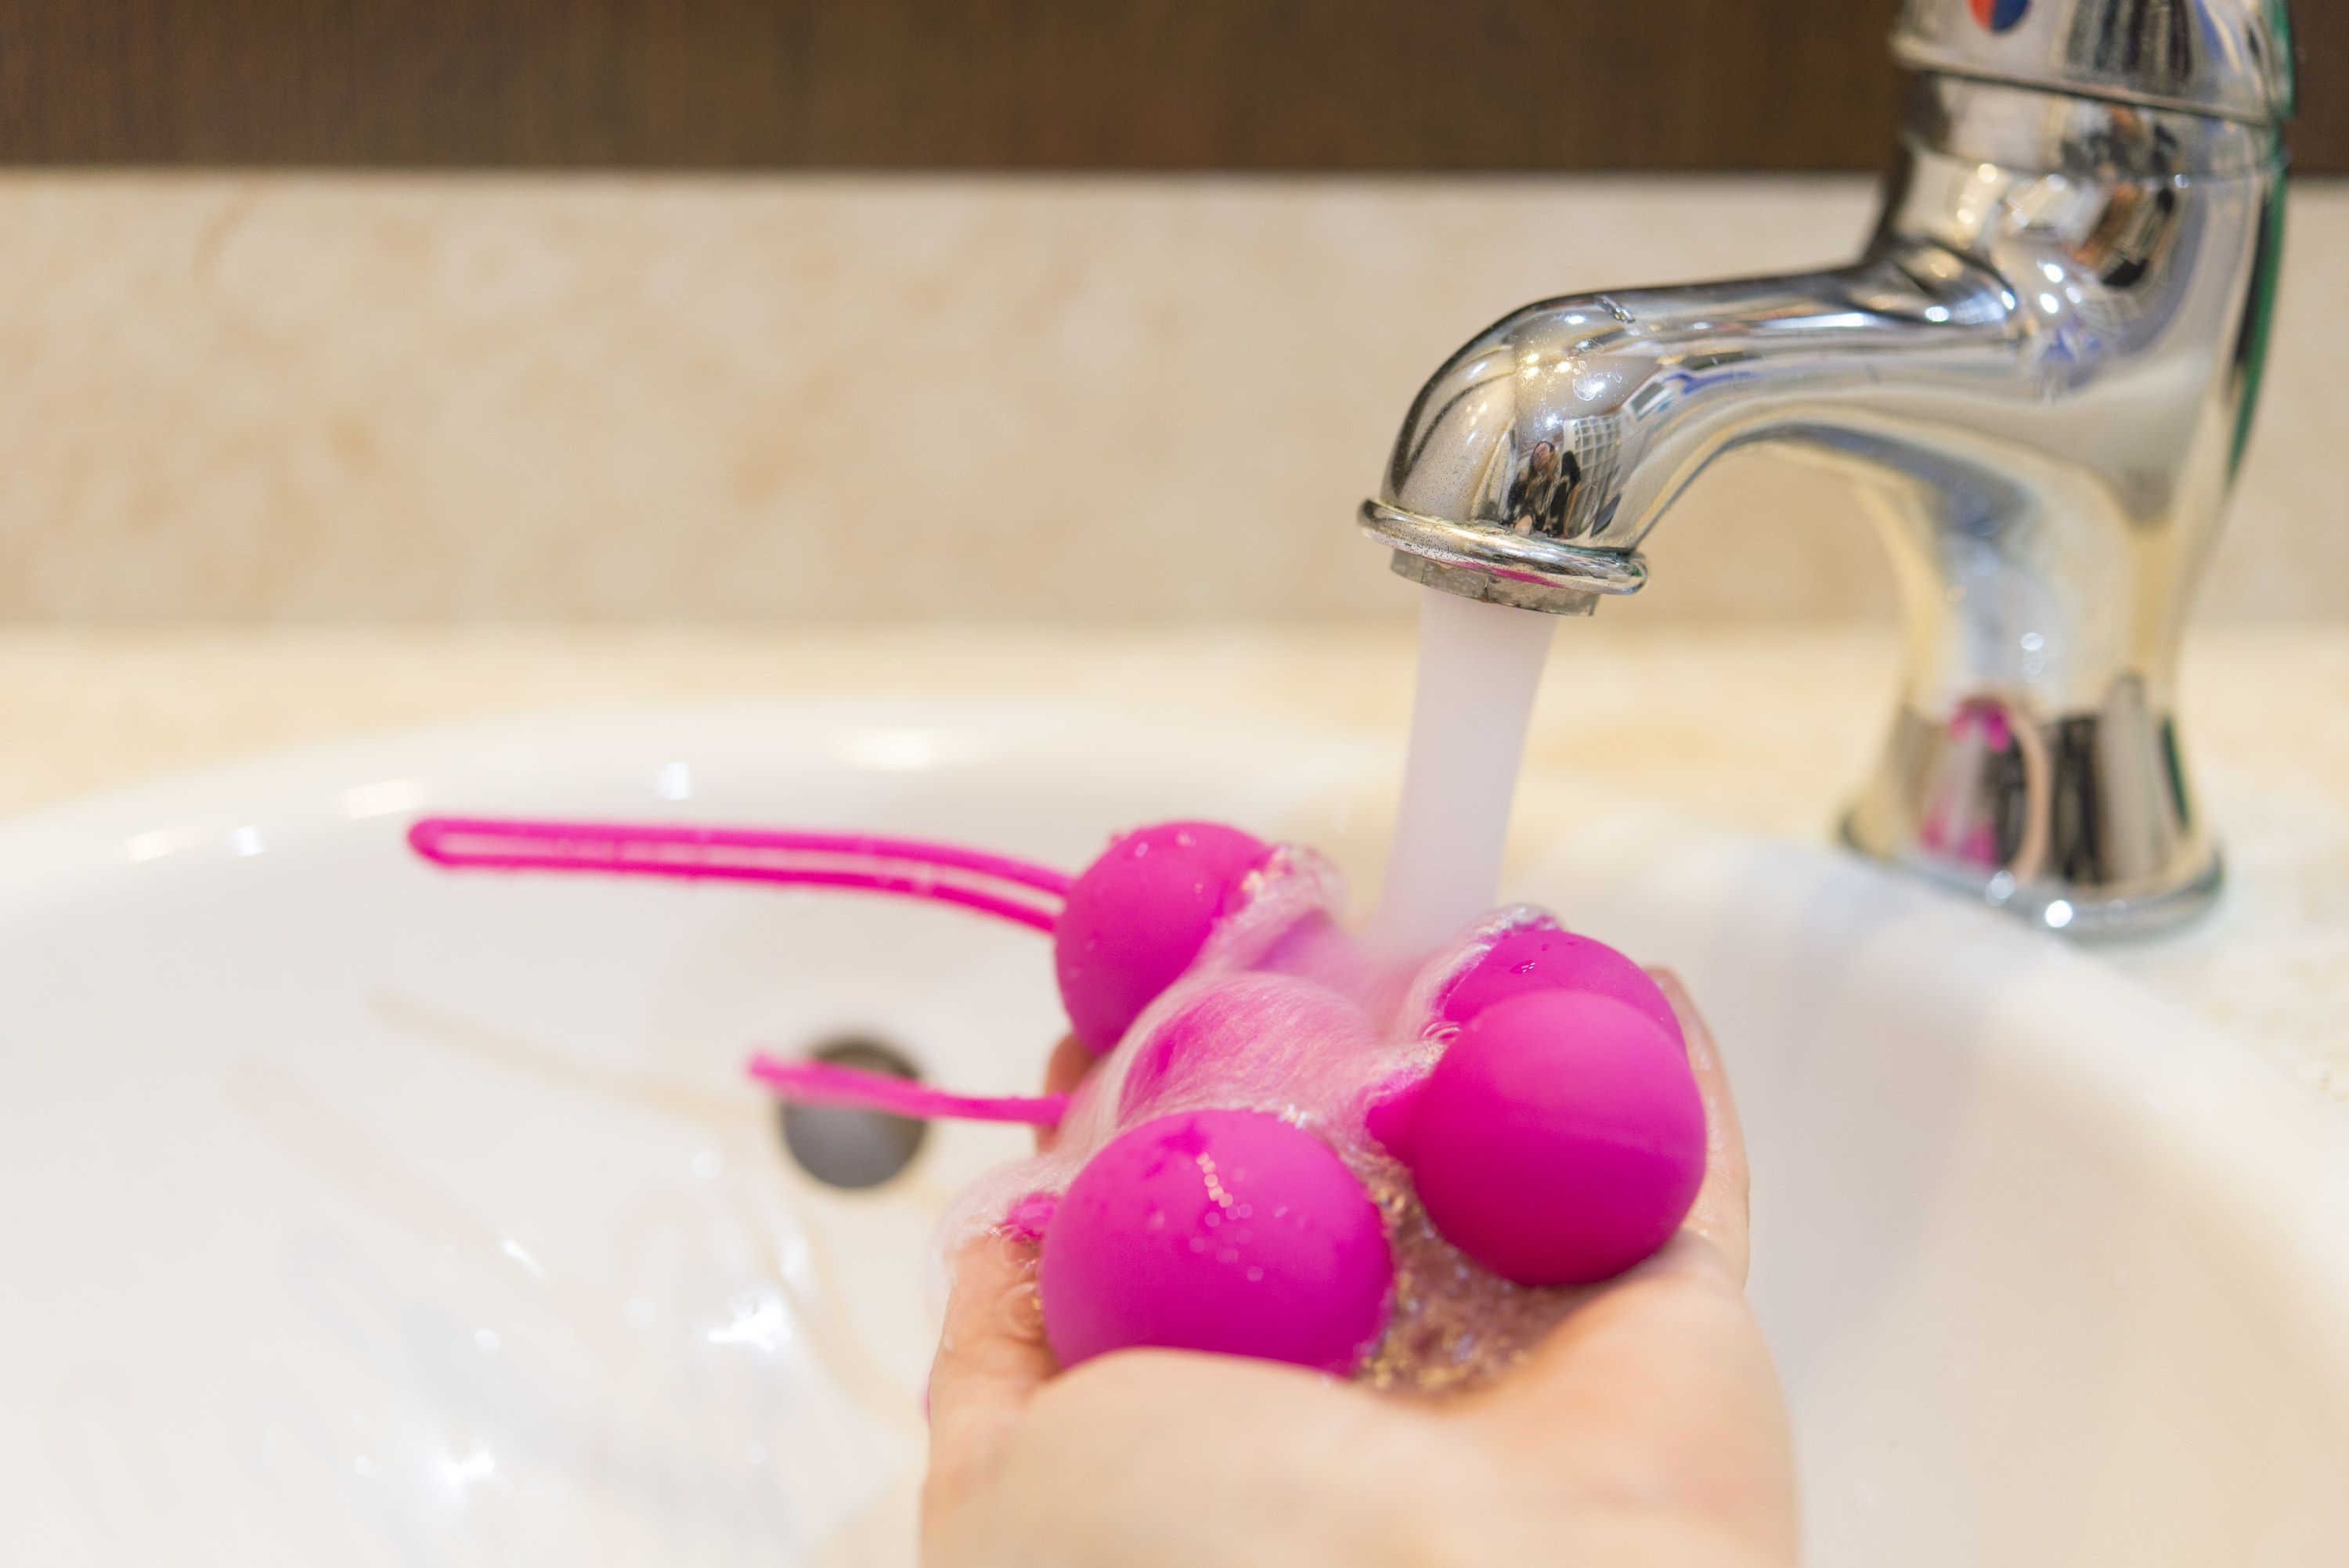 A hand holding sex toys under a faucet to clean them. 